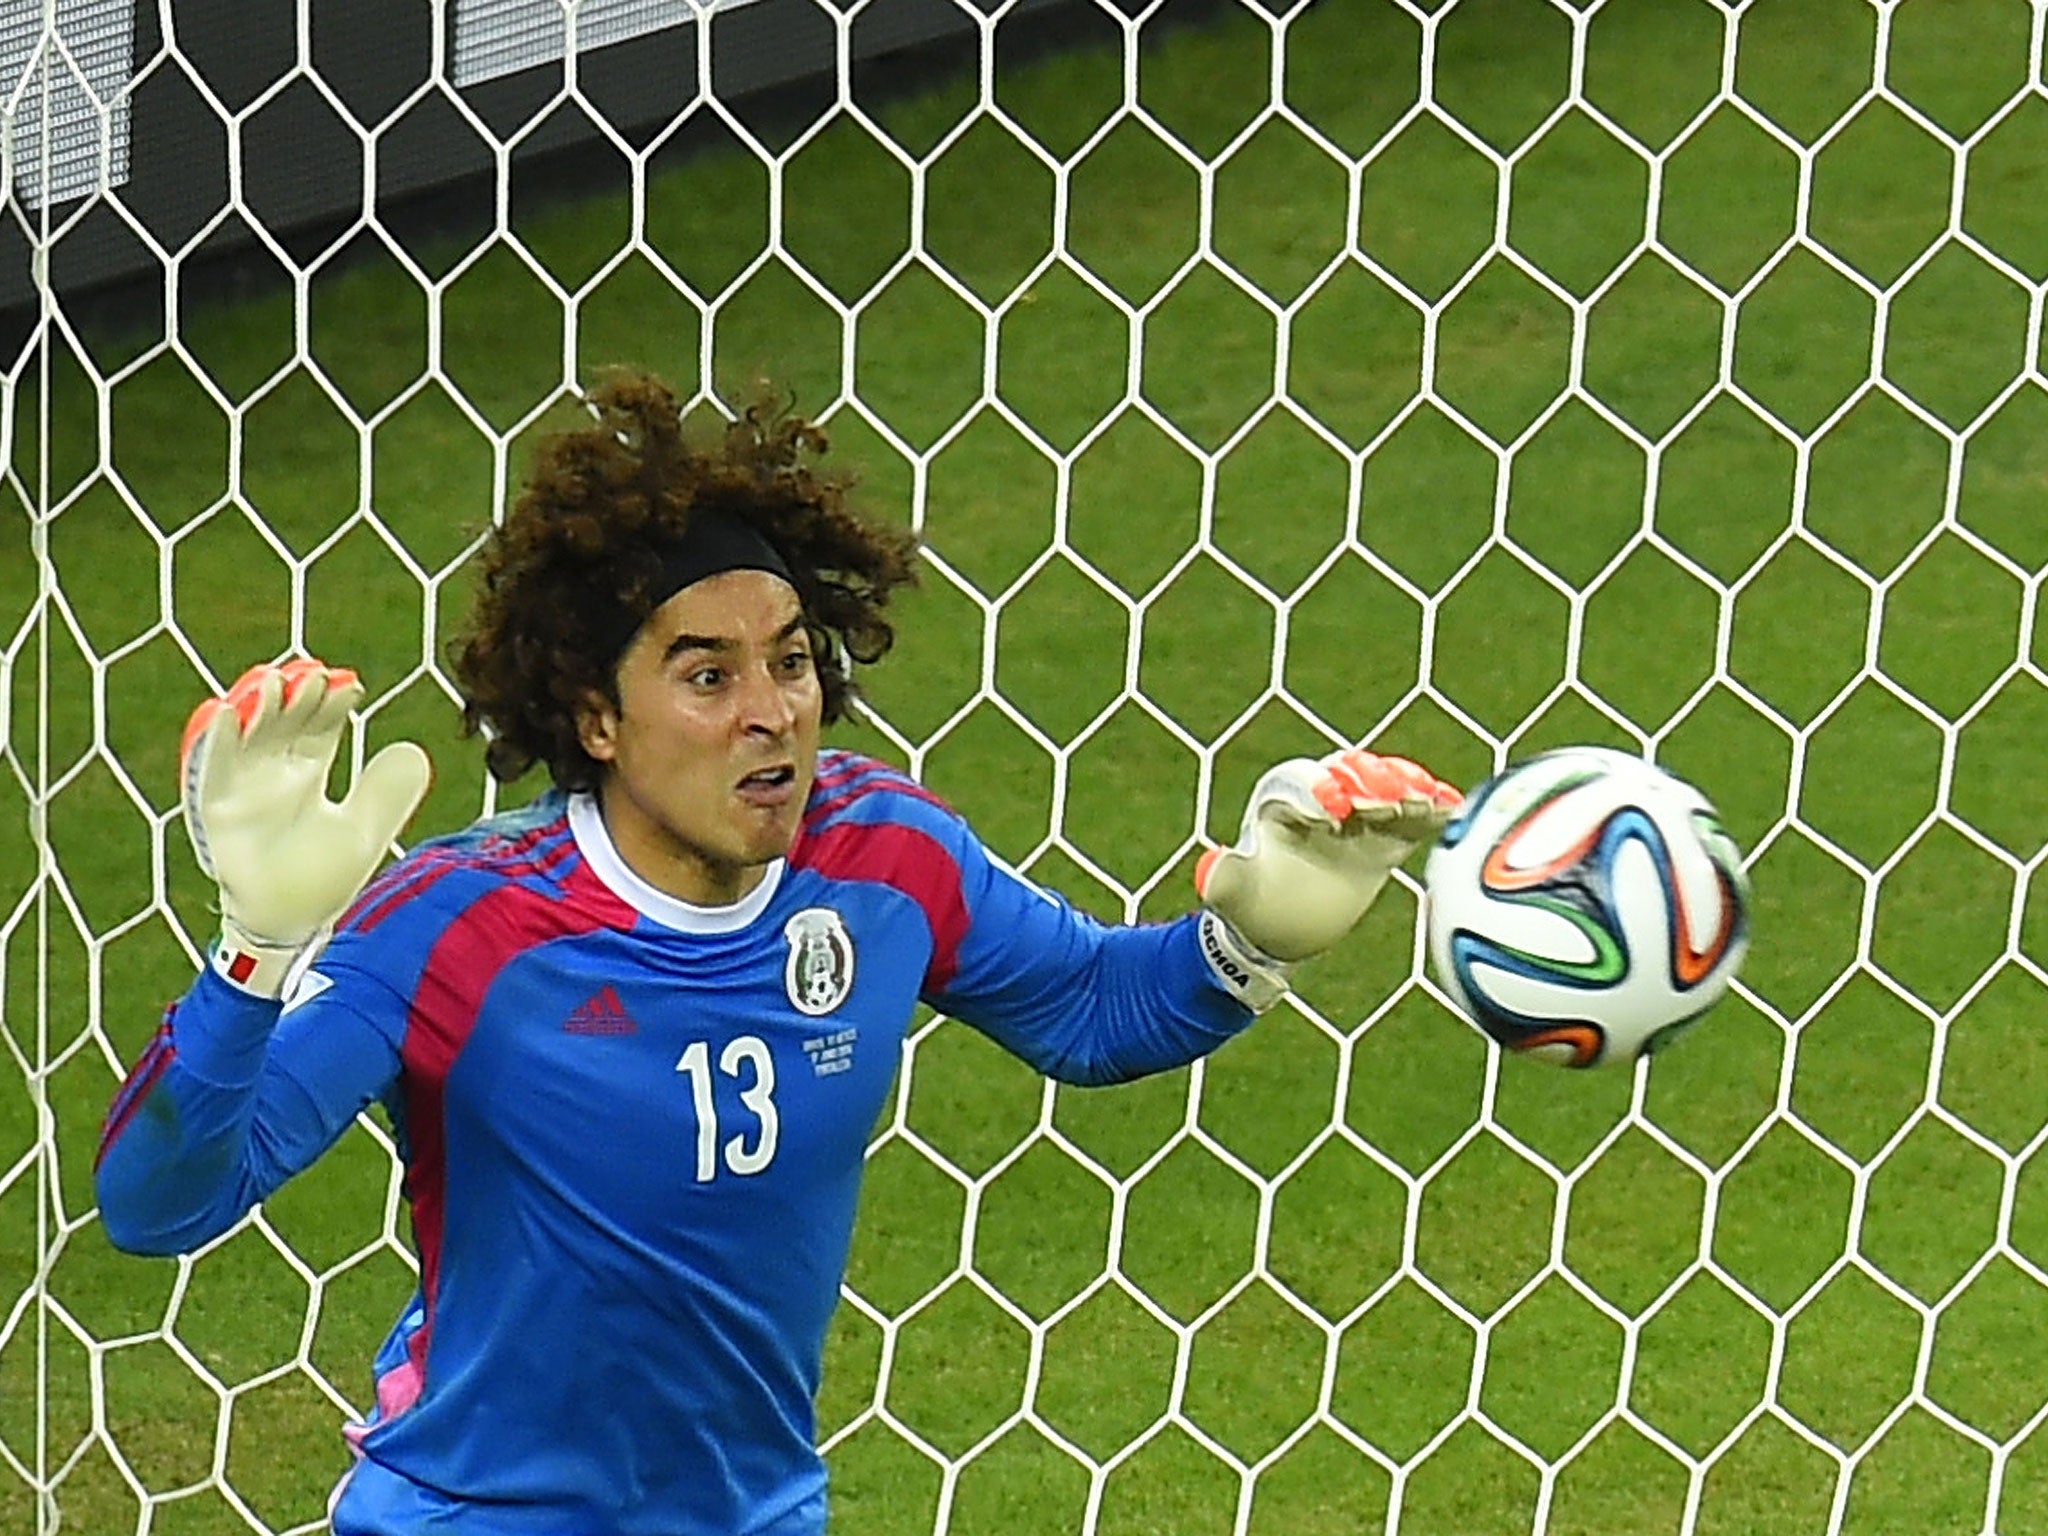 Mexico's goalkeeper Guillermo Ochoa saves an attempt at goal during a Group A football match between Brazil and Mexico in the Castelao Stadium in Fortaleza